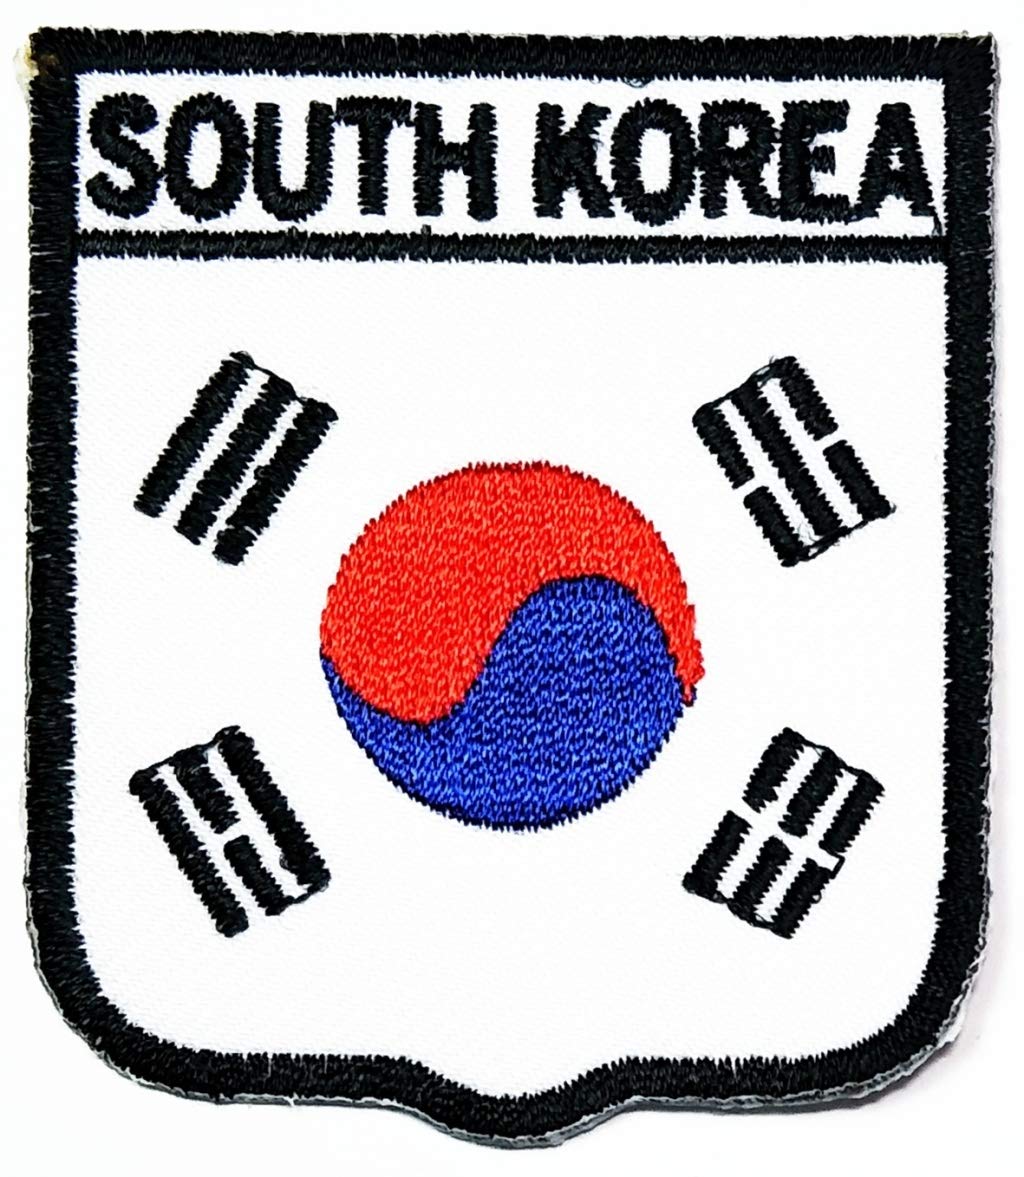 Nipitshop Patches South Korea Country Flag National Emblem Iron On Sew On Patch for Clothes Backpacks T-Shirt Jeans Skirt Vests Scarf Hat Bag